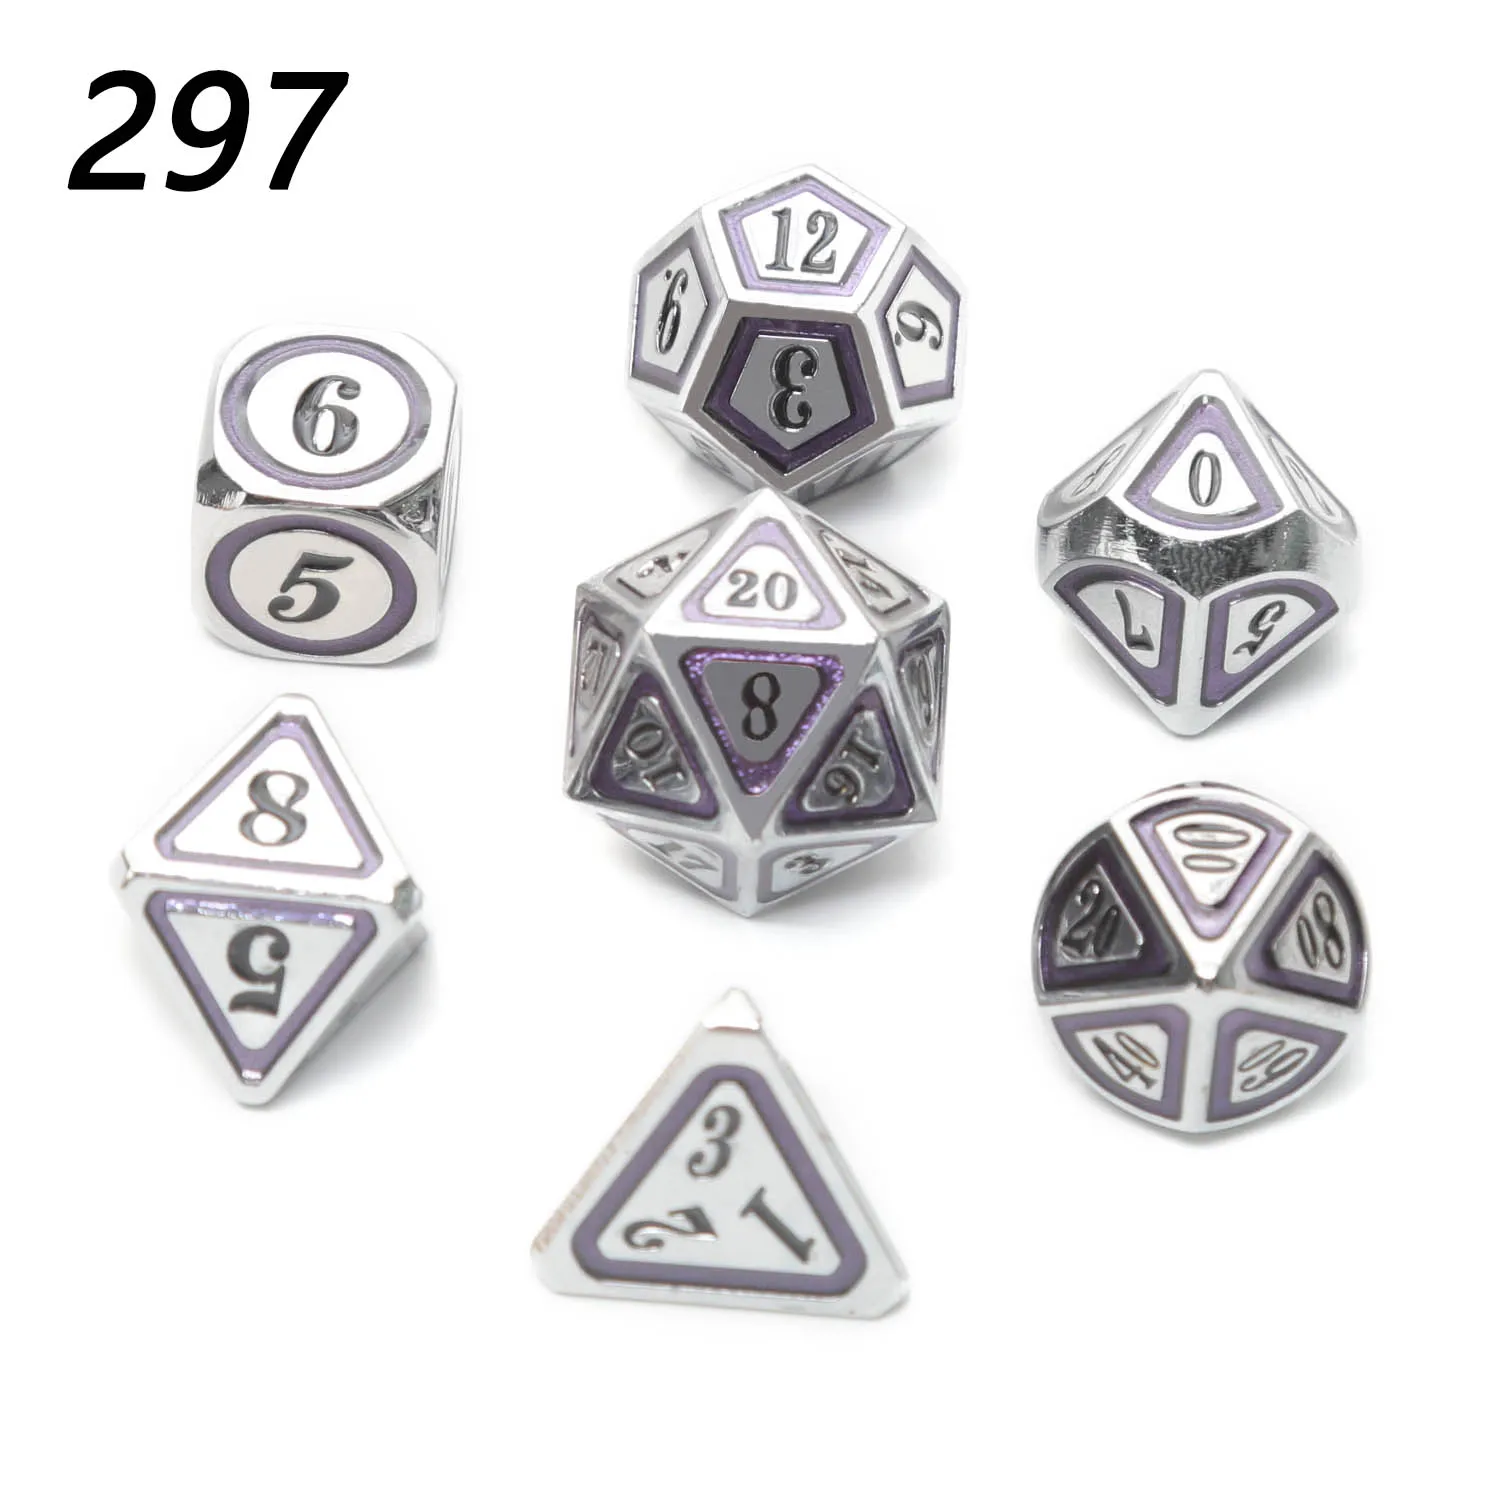 Chengshuo rpg dice dungeons and dragons table games sales promotion polyhedral metal dices Zinc alloy new style number dices